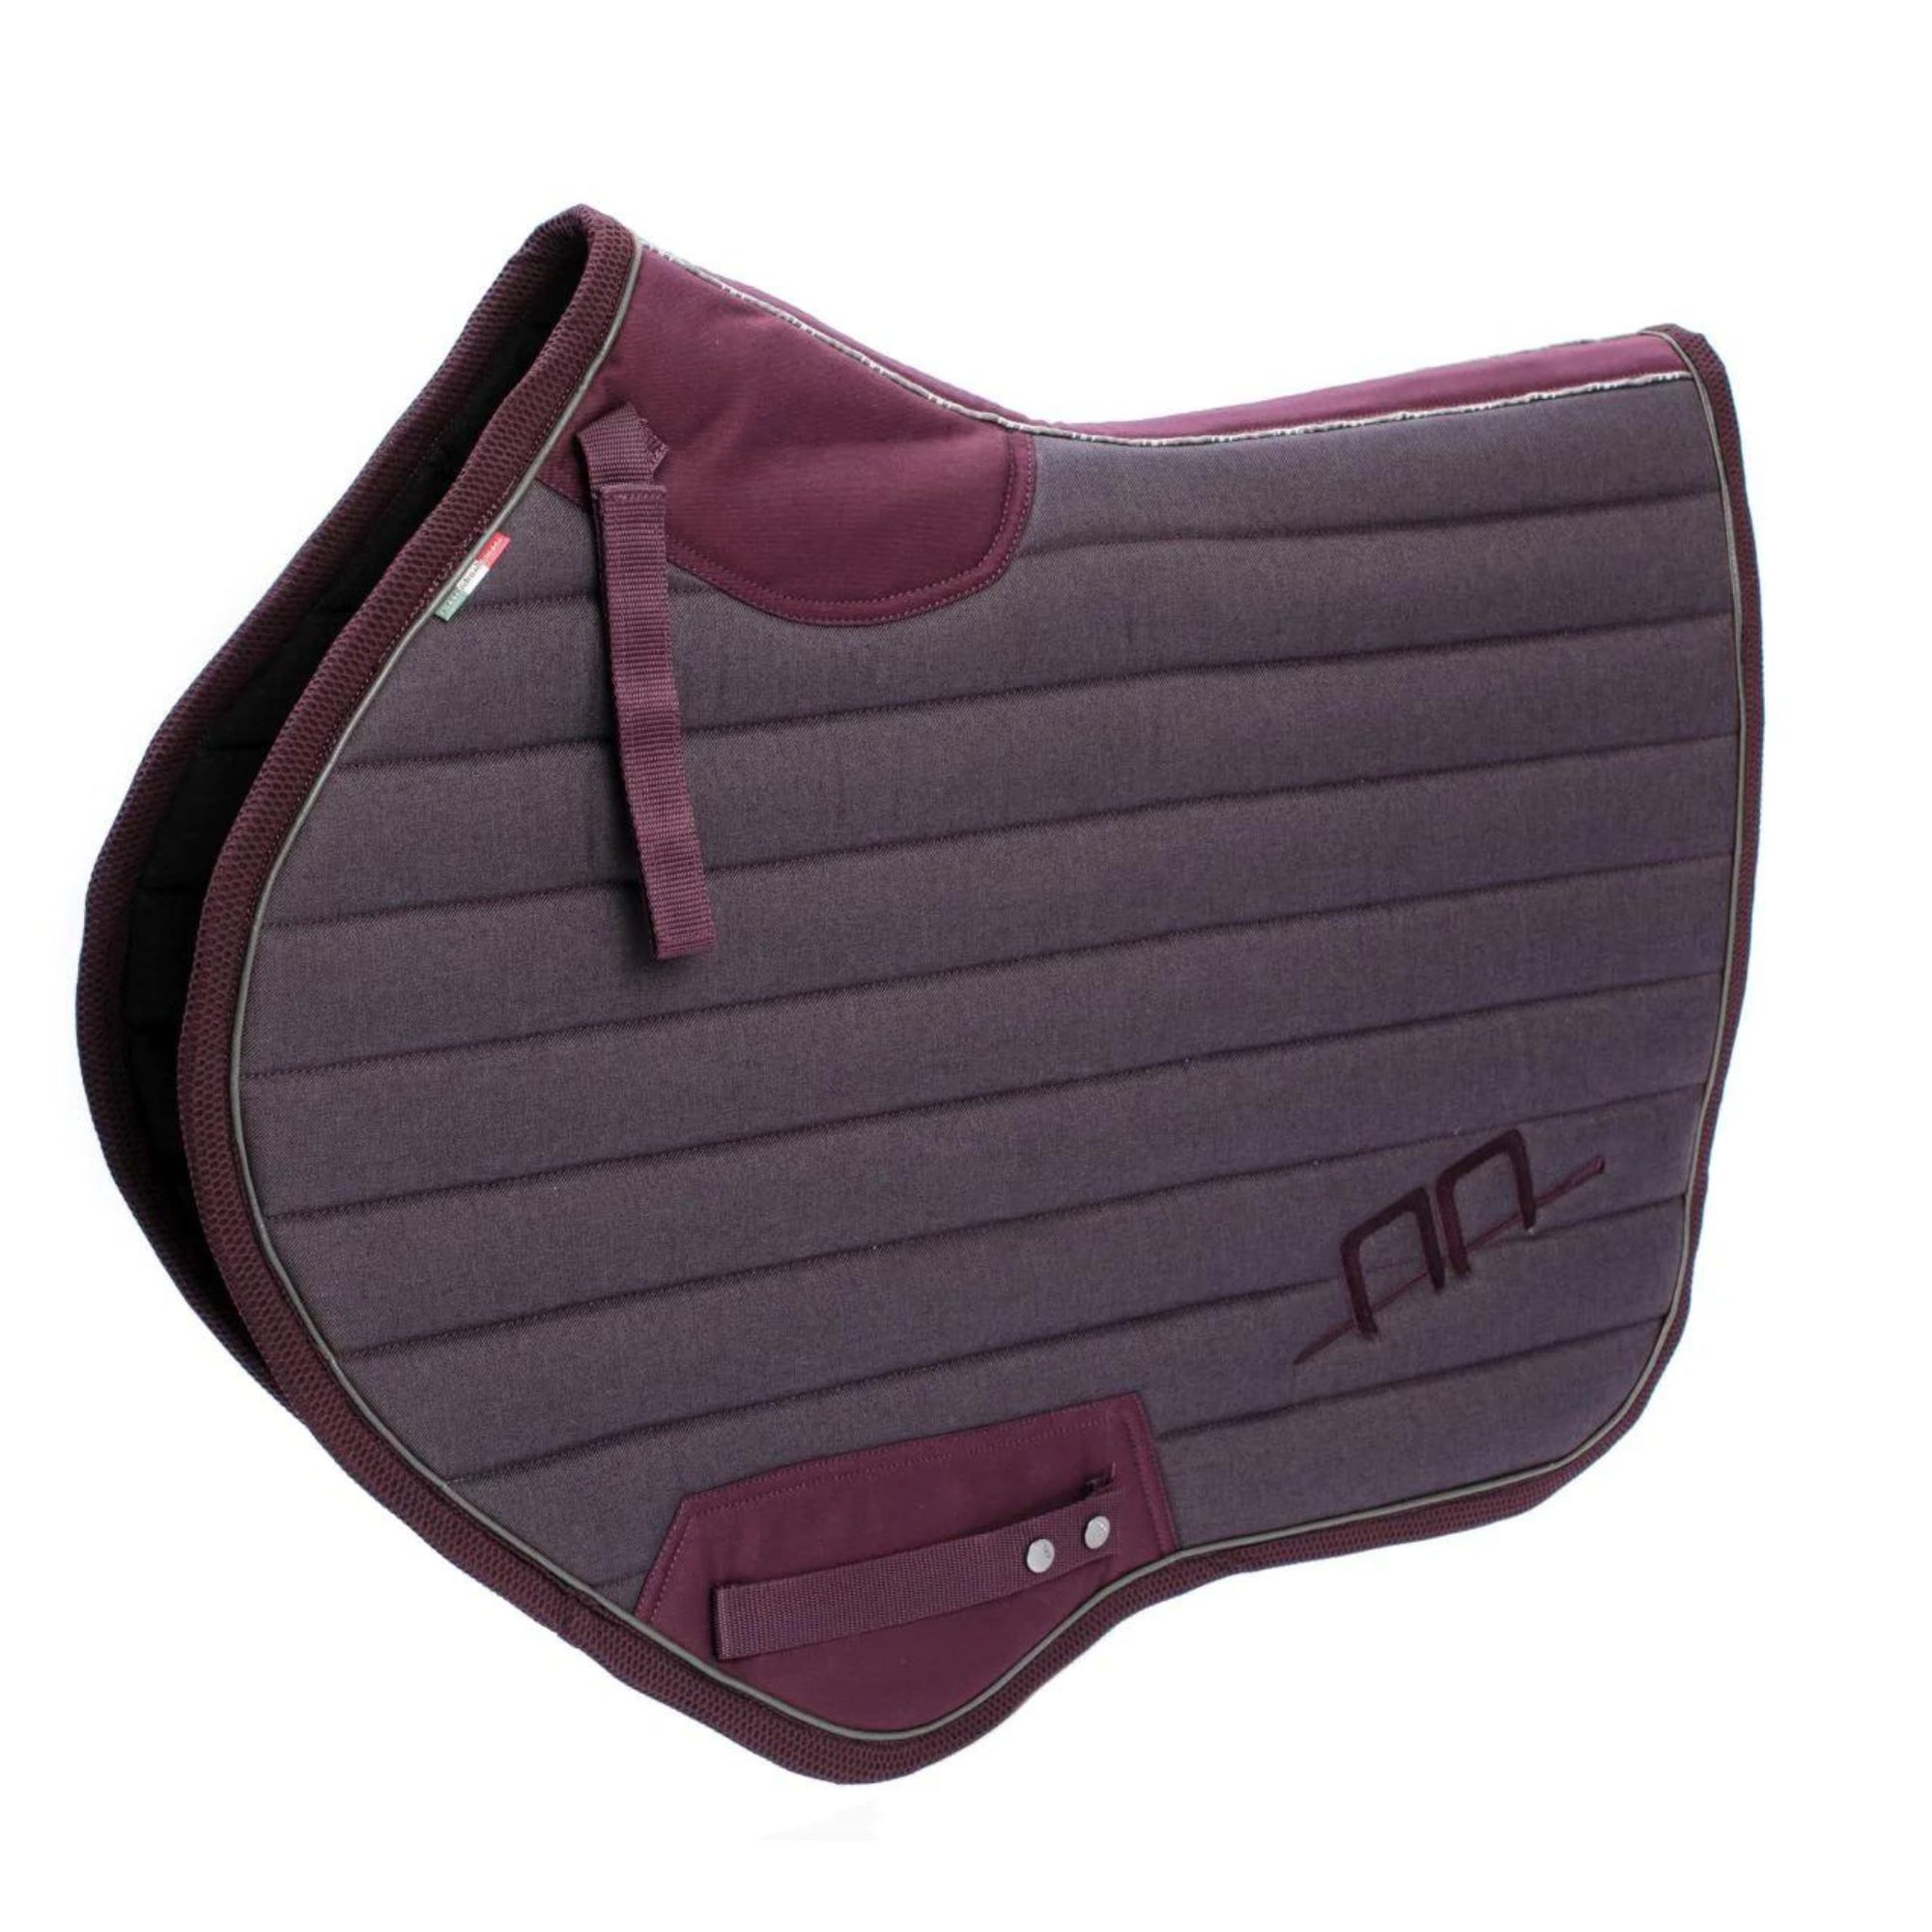 Black sports saddle pad with the AA Platinum logo embroidered in silver